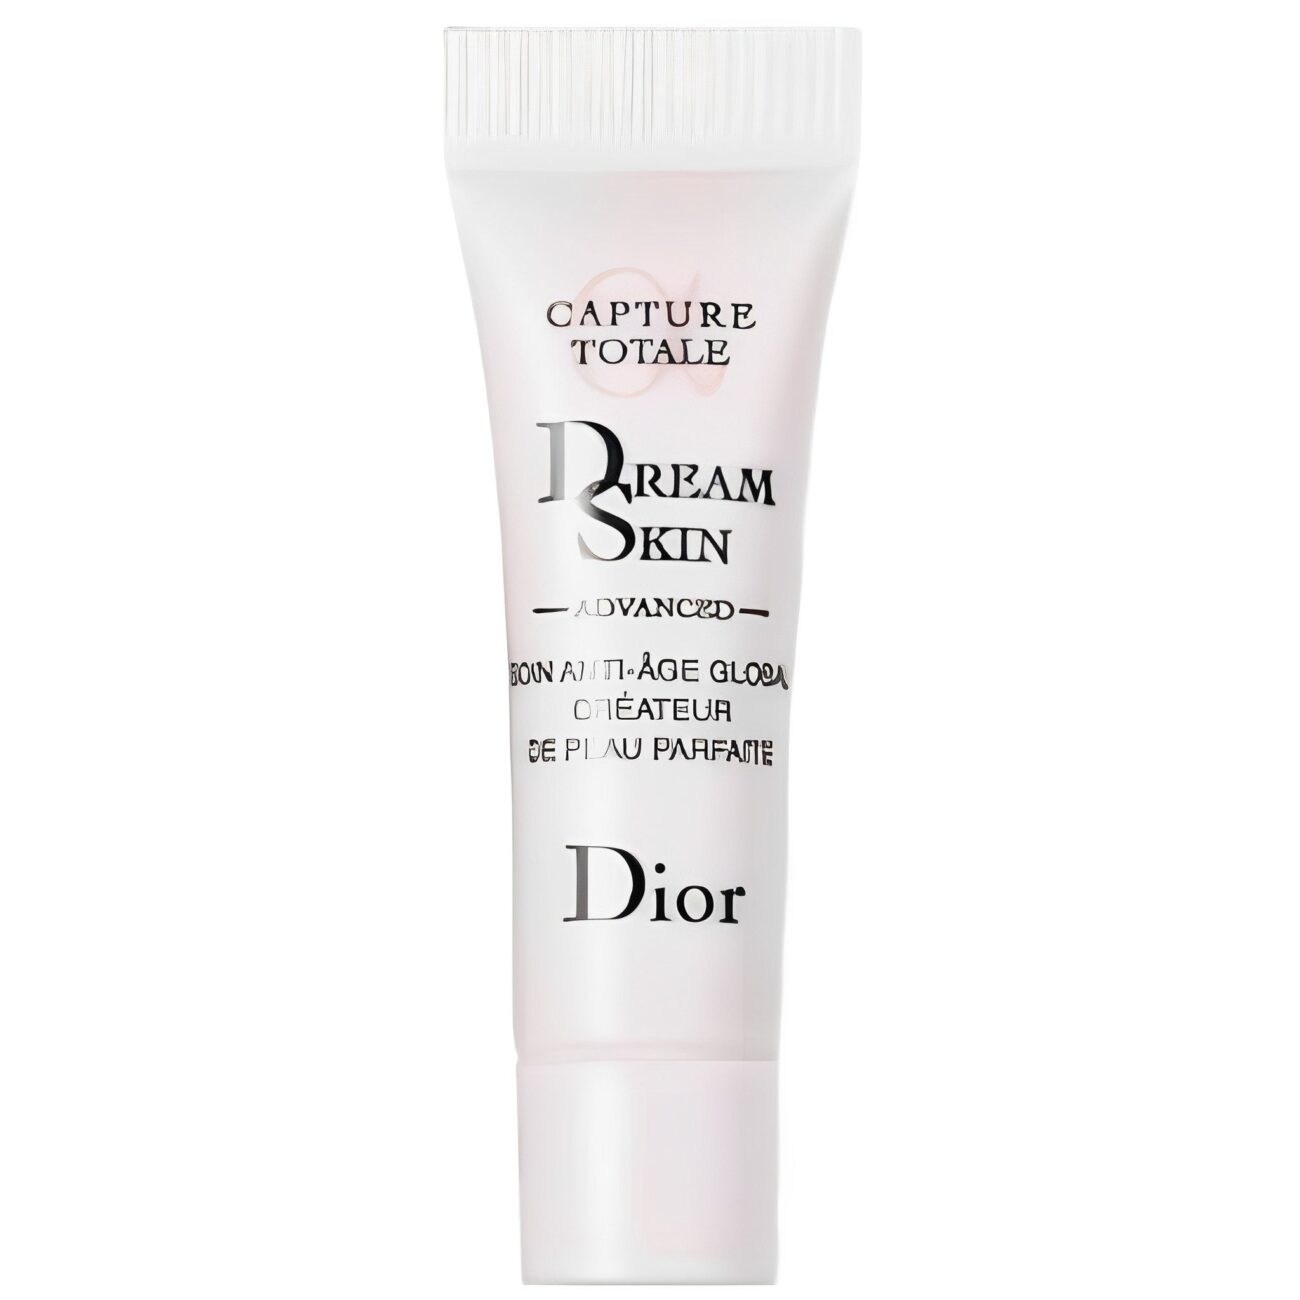 Capture Totale Dreamskin Perfector trial size-DIOR